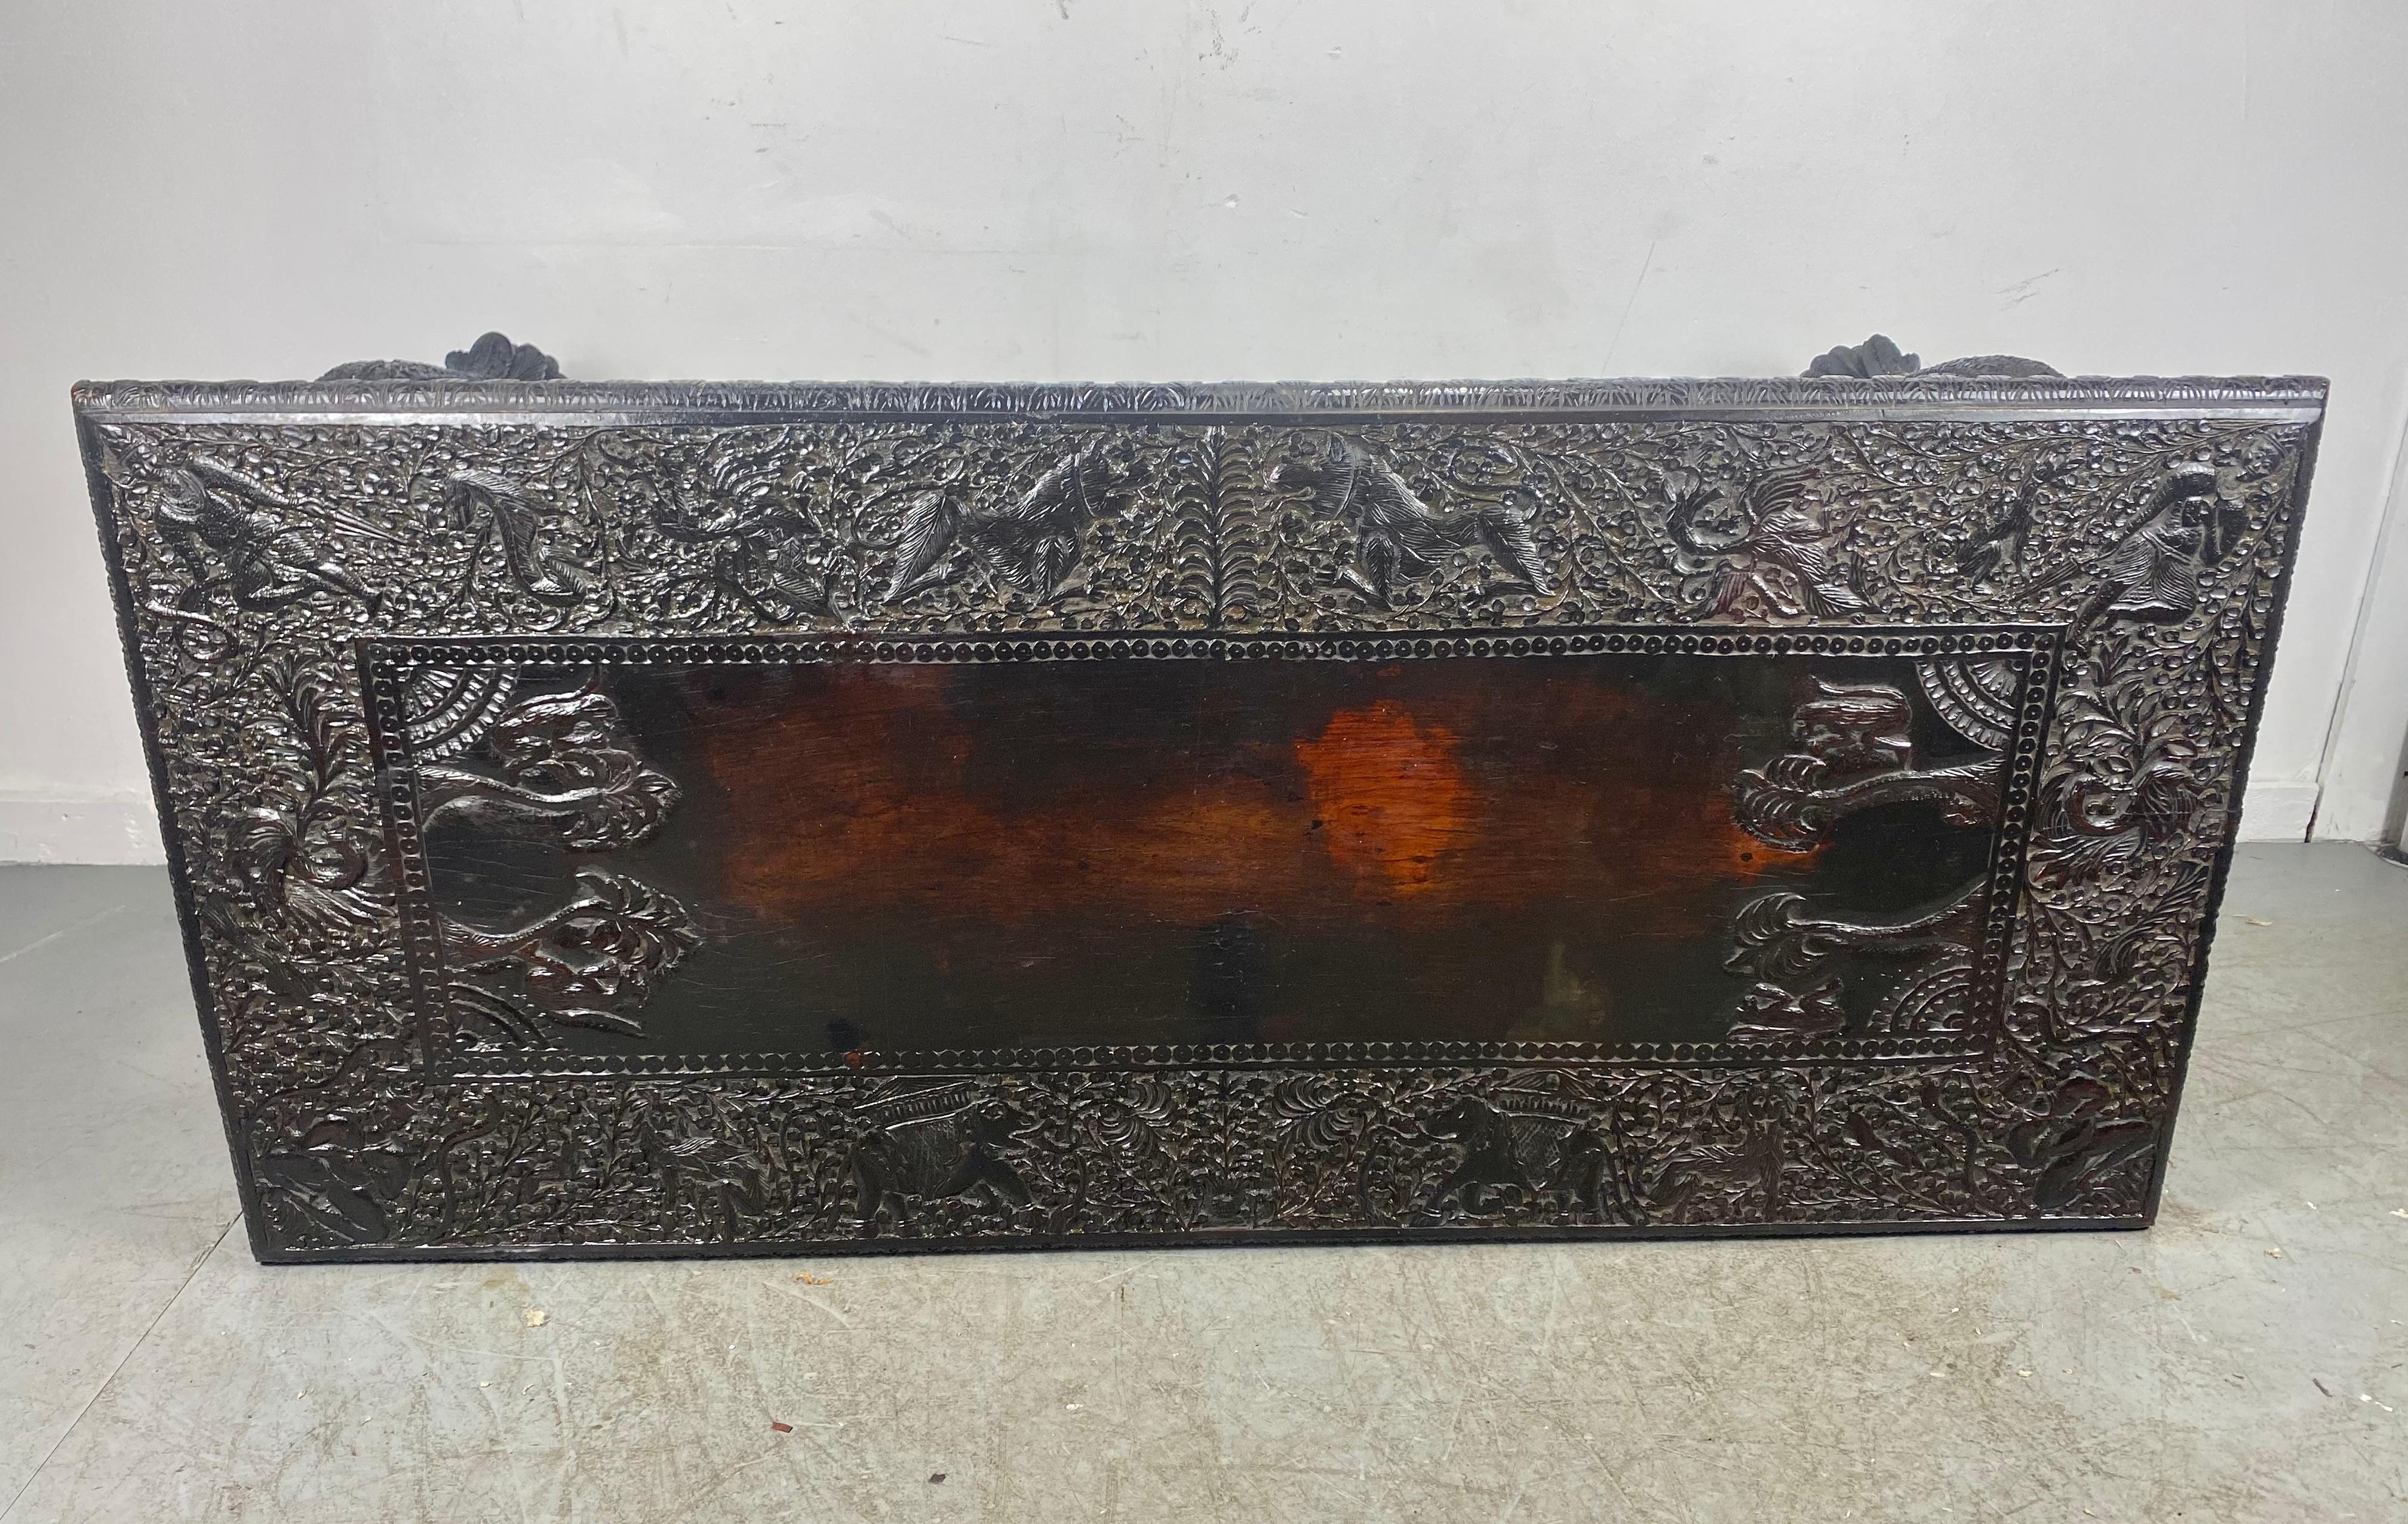 Rosewood Exquisetly Carved Turn or the Century AngloIndian Table, Dining / Desk / Library